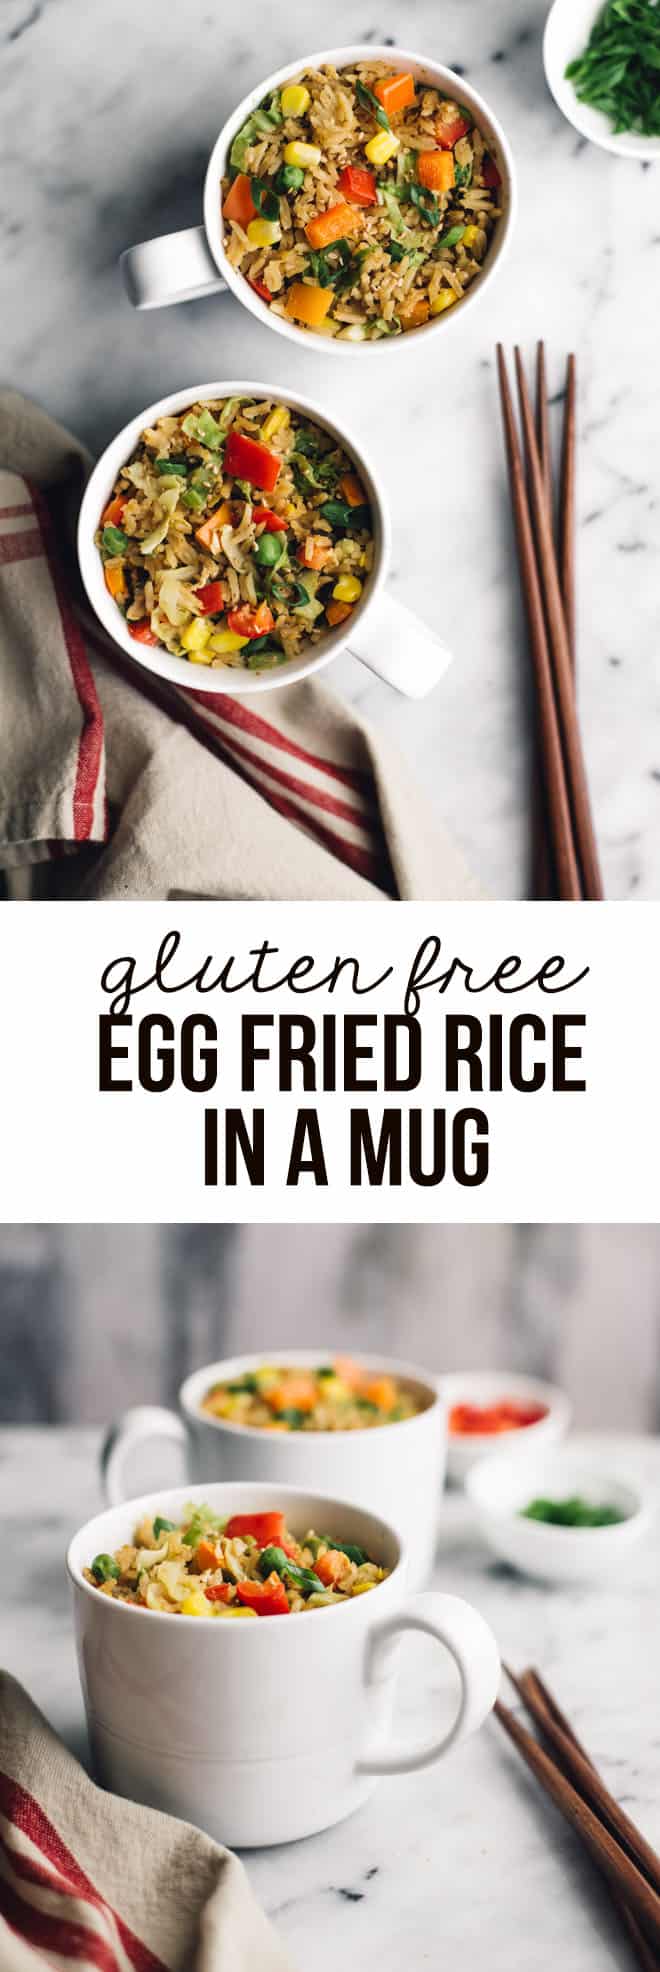 Gluten-Free Egg Fried Rice in a Mug - easy, healthy meal that's ready in less than 10 minutes! by Lisa Lin of webserie.futebolmilionario.com